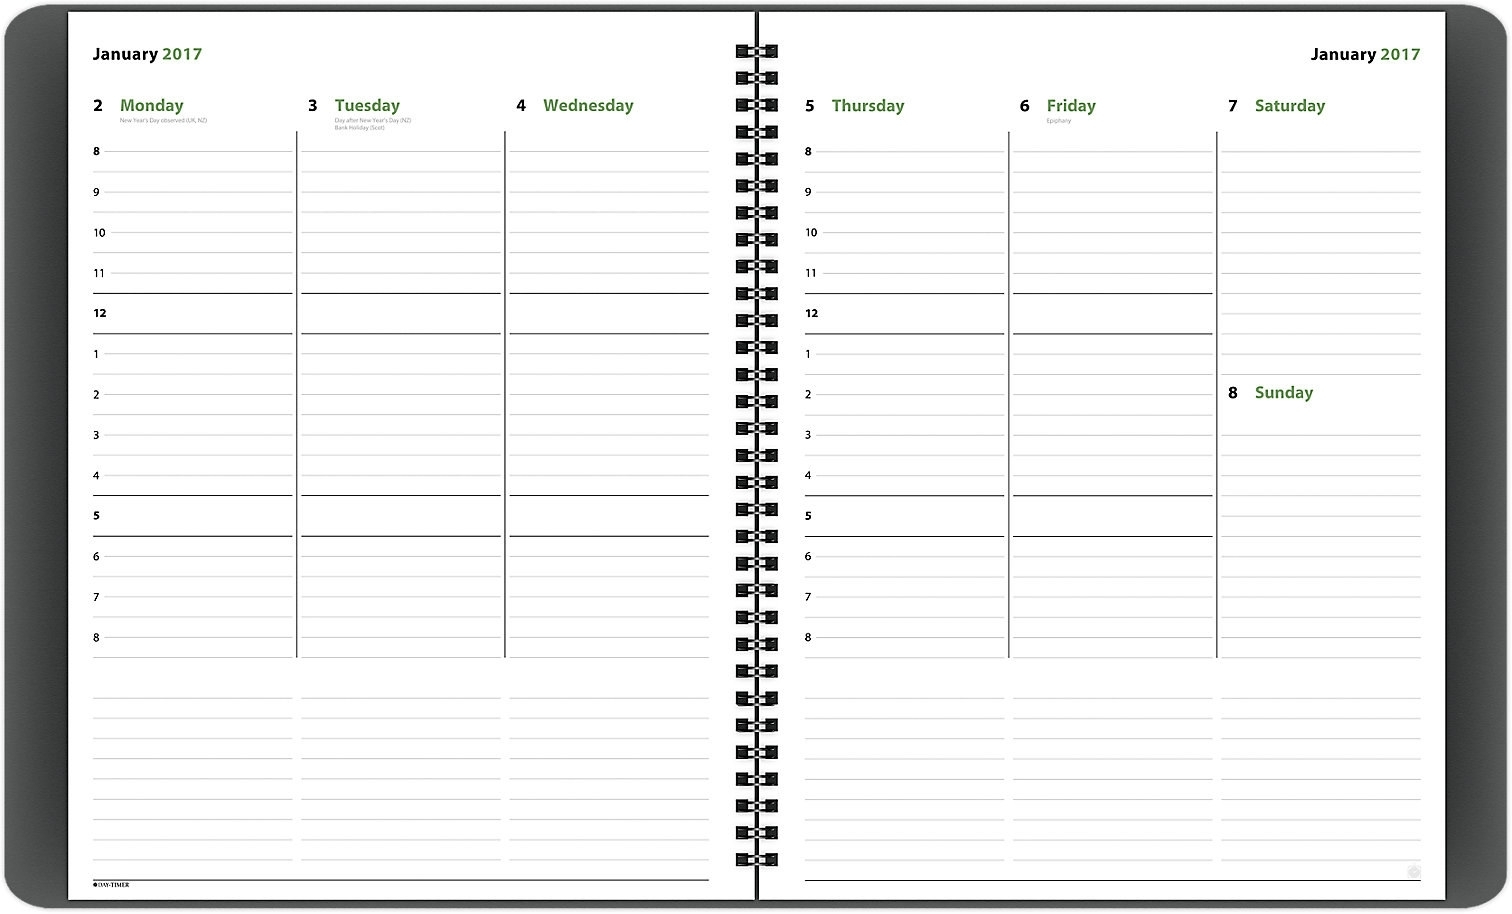 Daily Planner With Time Slots  Calendar Inspiration Design throughout Weekly Planner With Time Slots Template